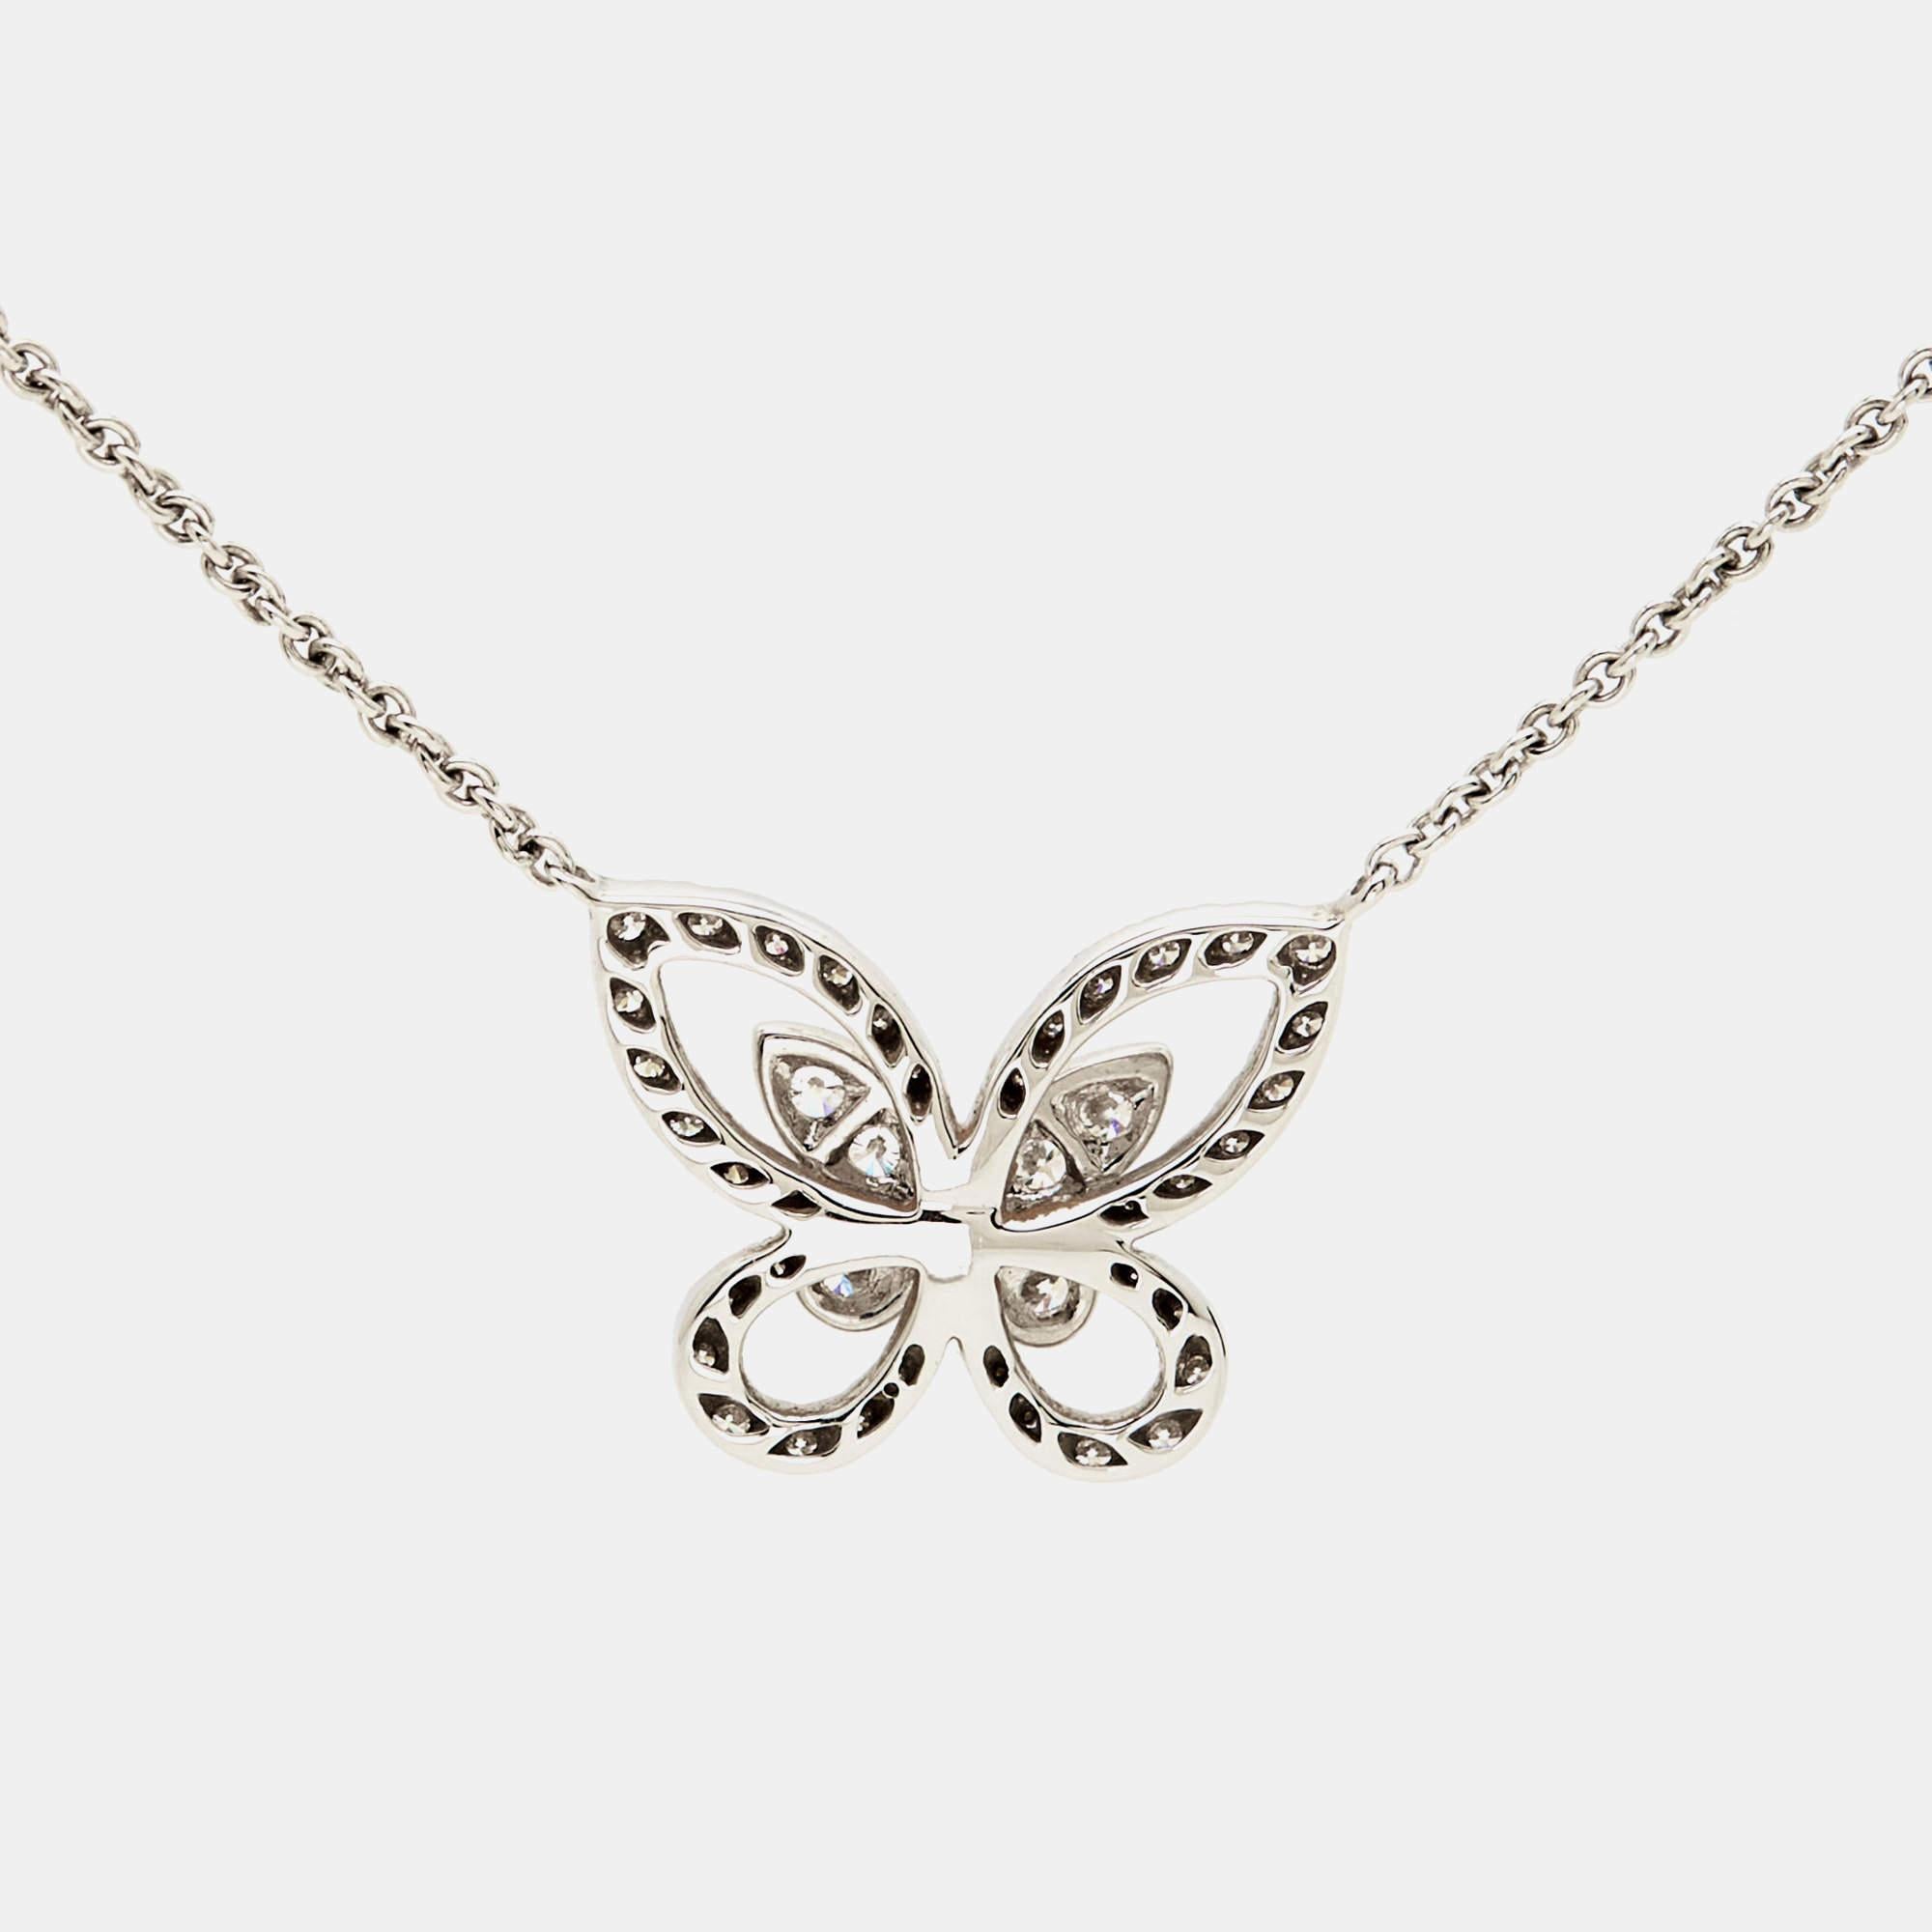 Graff takes a beloved motif from nature to create this stunning butterfly necklace. It is crafted in 18k white gold and the chain holds 5 wonderful butterflies carefully detailed with diamonds. The central pendant is a double-layered butterfly that